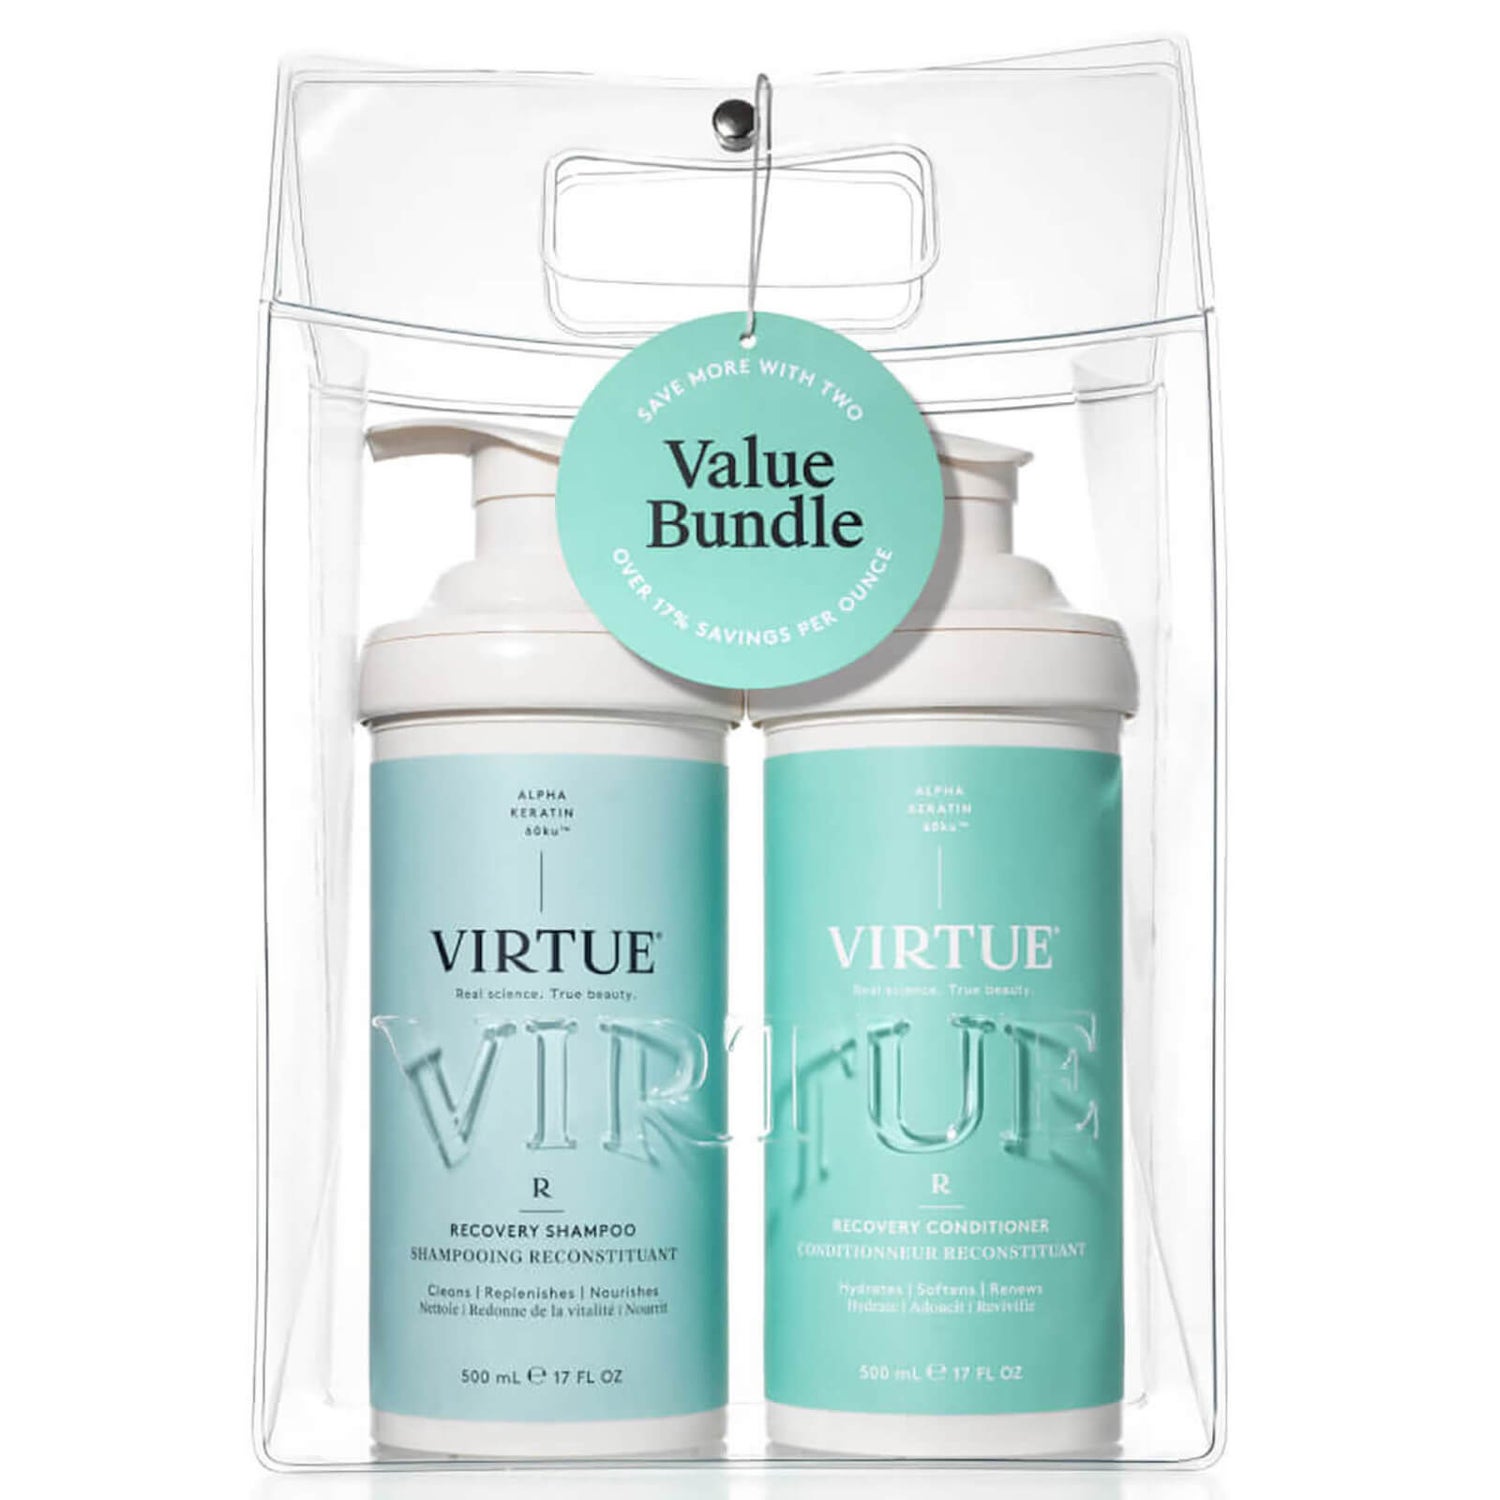 VIRTUE Recovery Professional Shampoo and Conditioner Duo